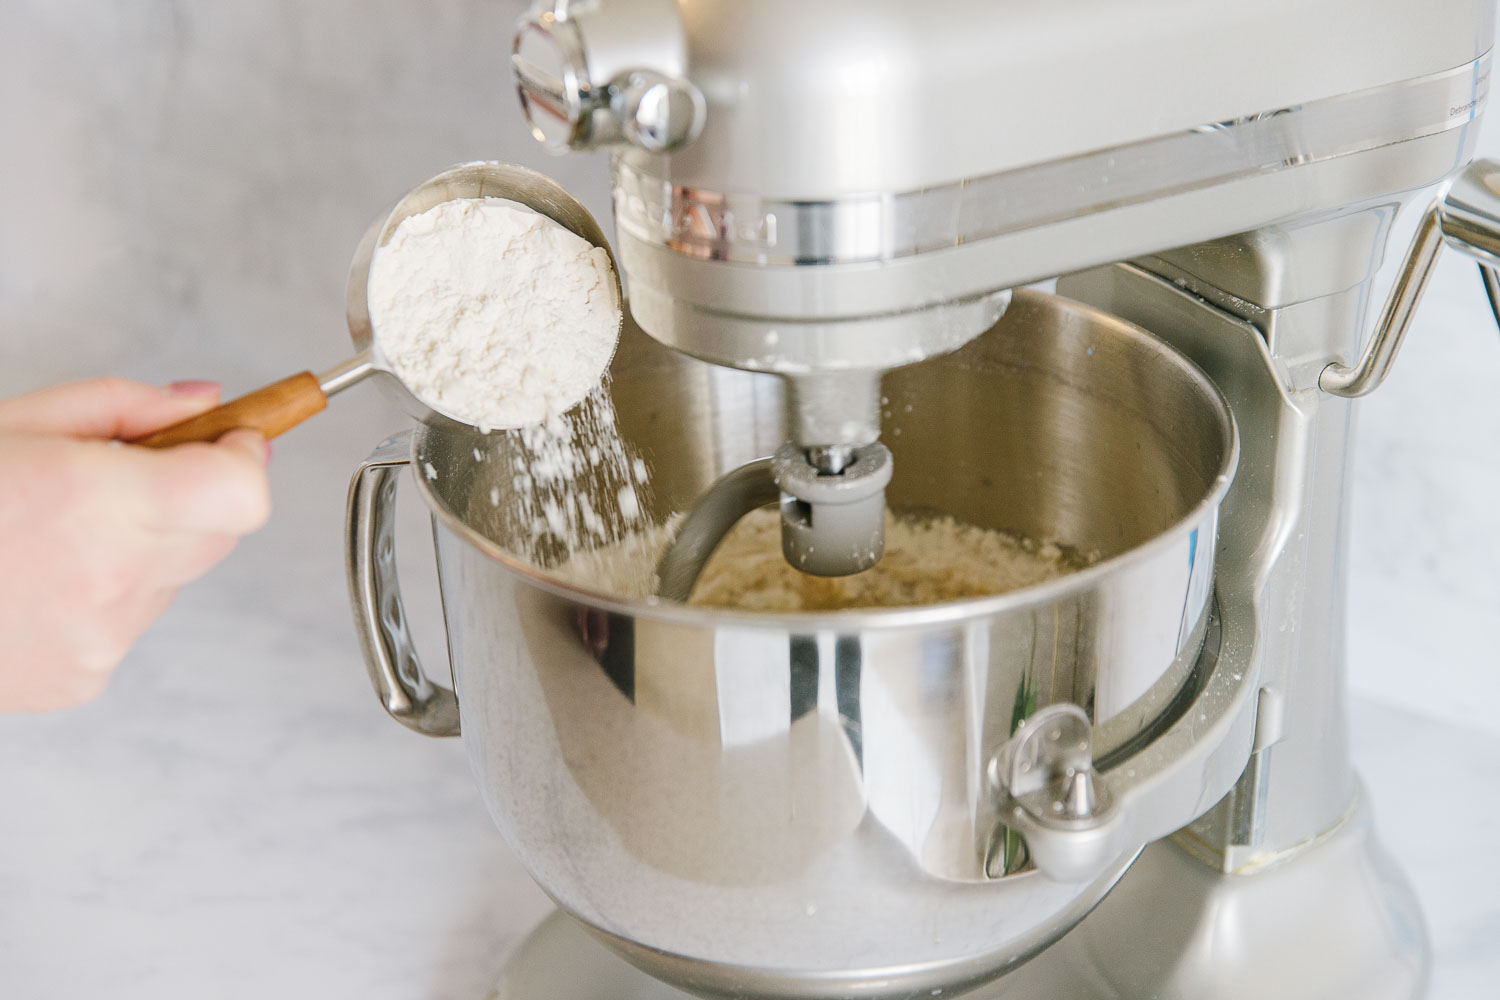 A silver Kitchenaid mixer with a hand adding in a measuring cup of flour into the bowl of ingredients.